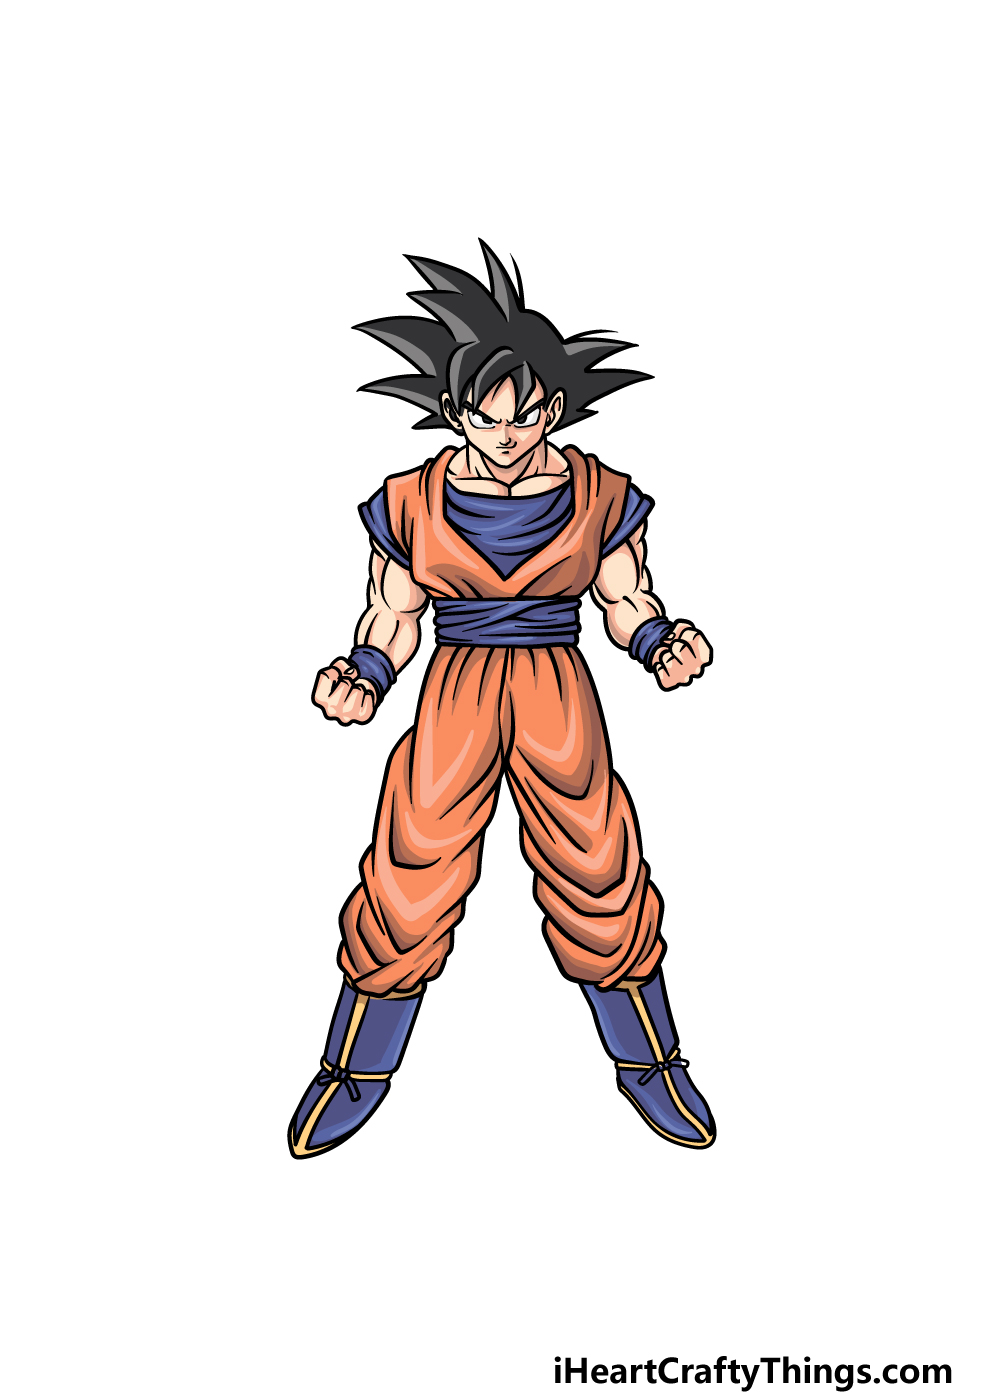 How did Goku turn into SSG during the Tournament of Power? - Quora